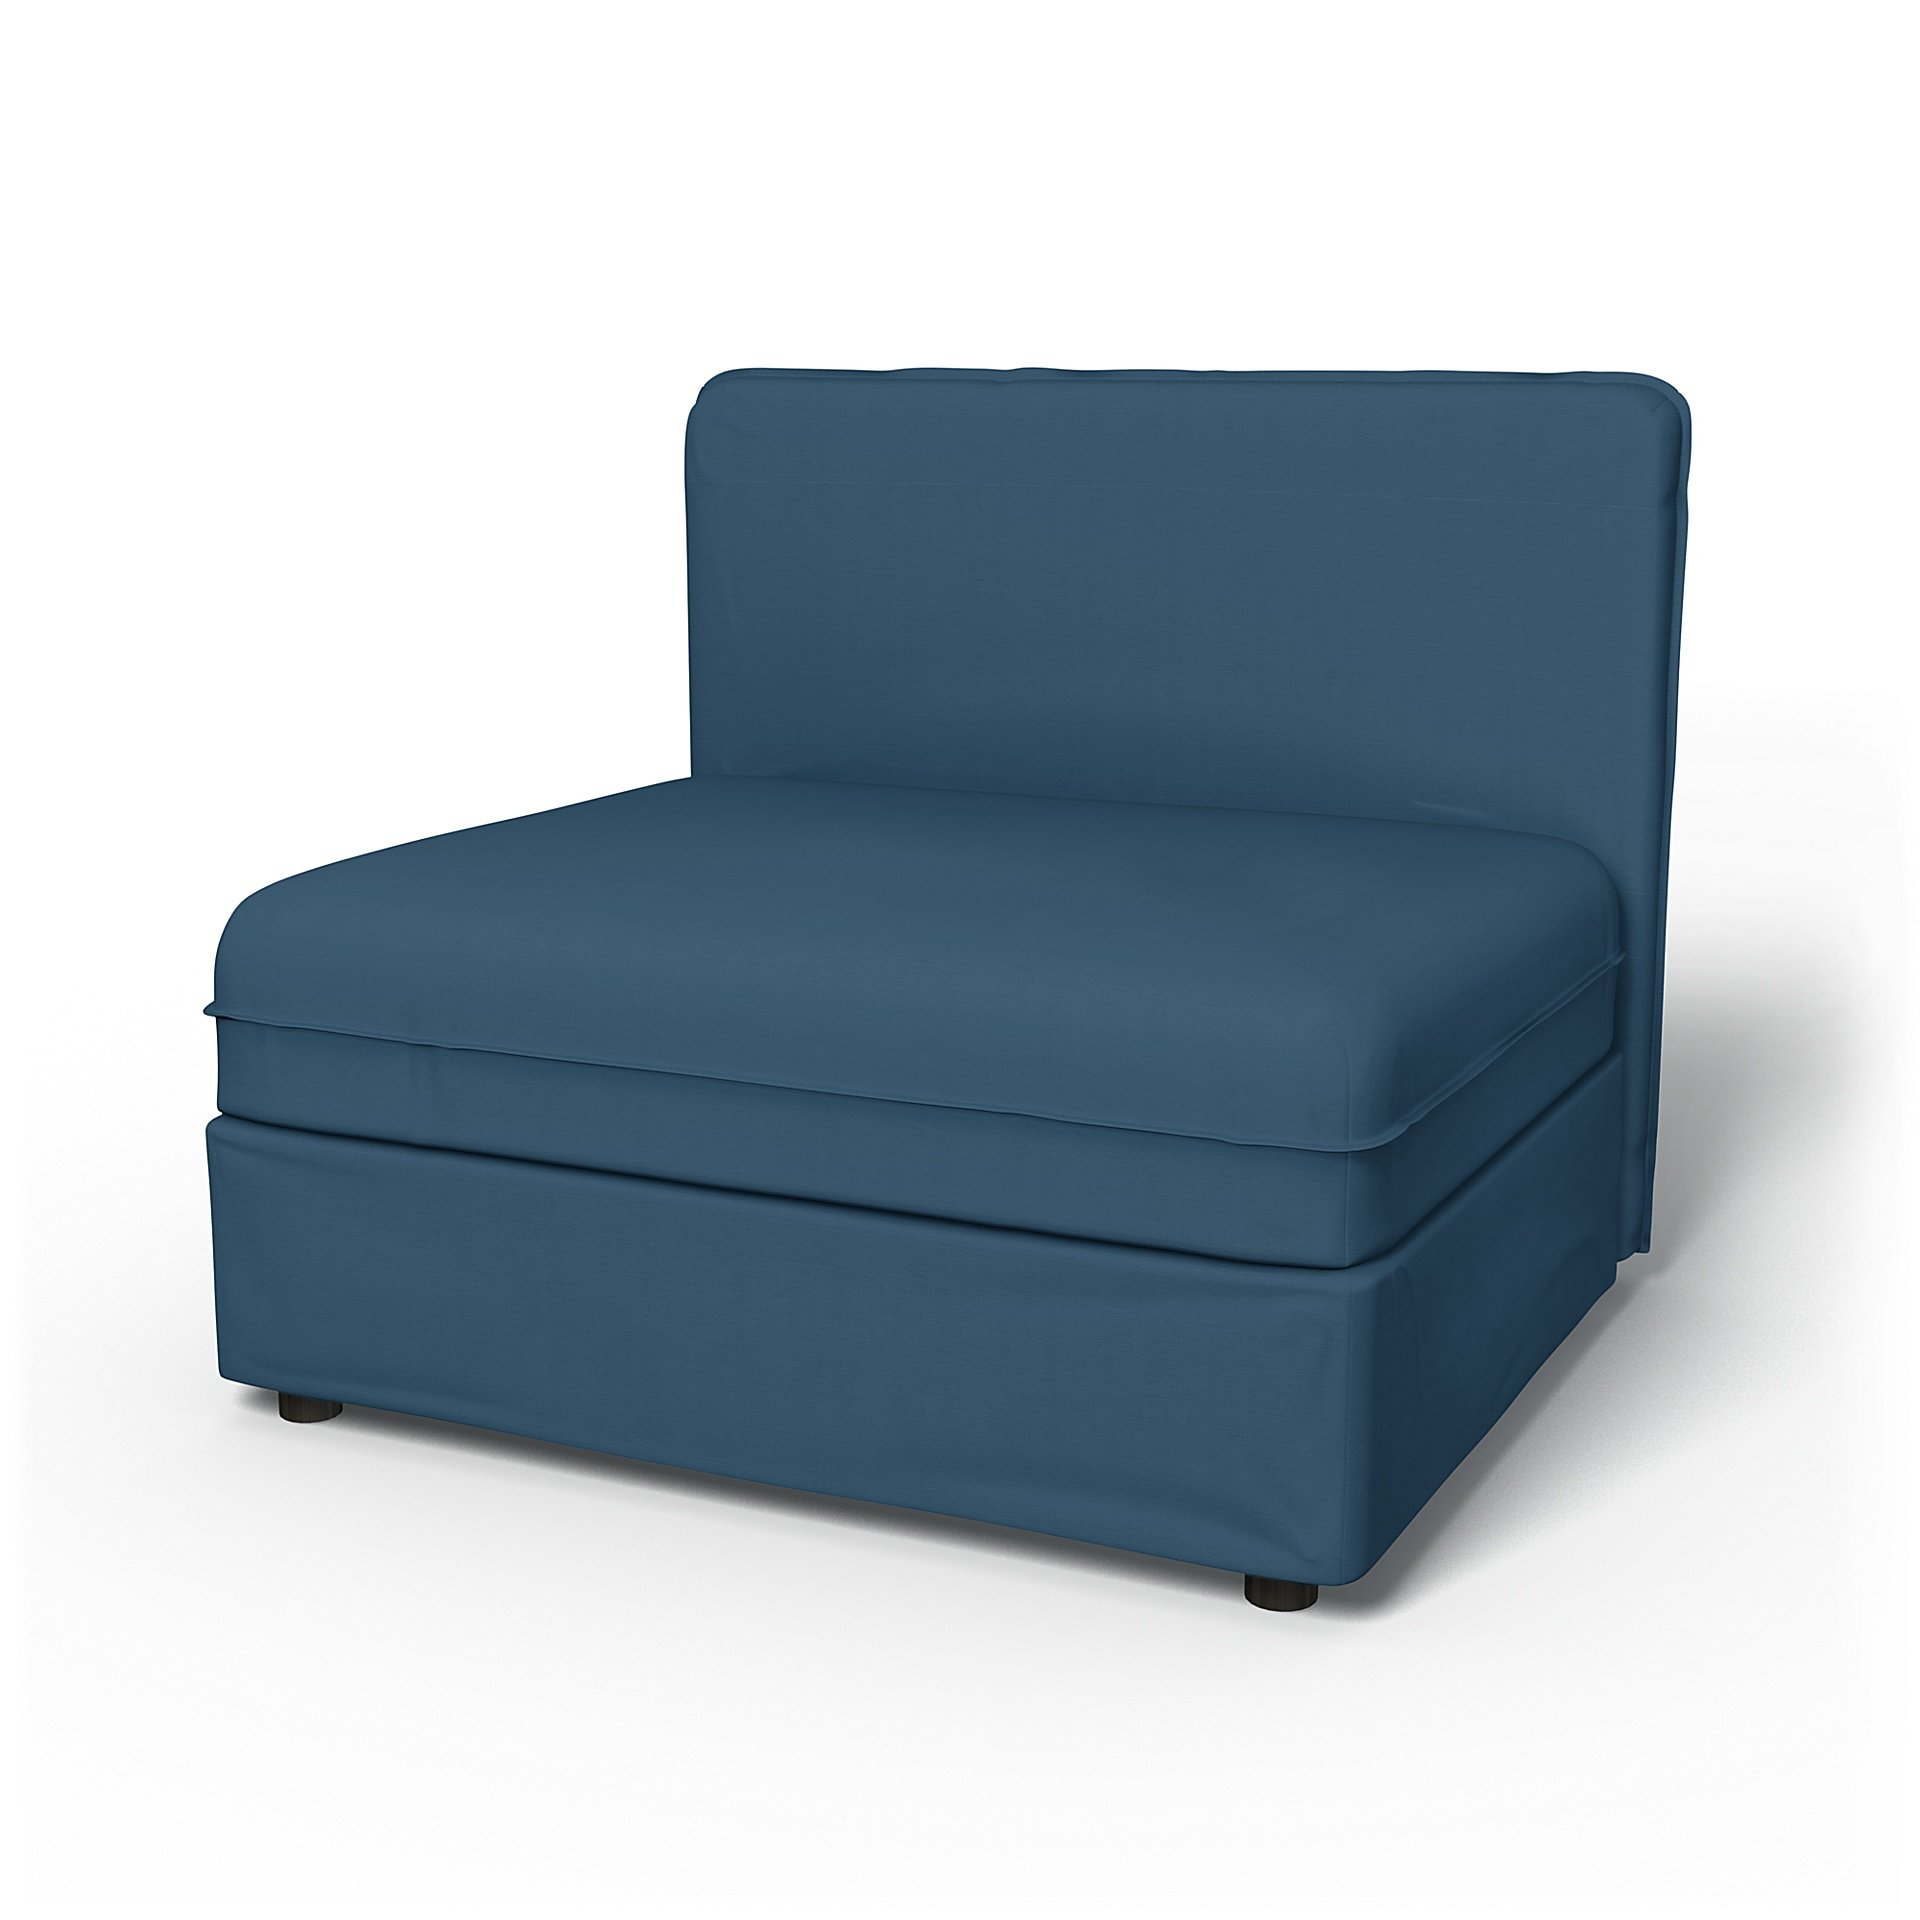 IKEA - Vallentuna Seat Module with Low Back Cover 100x80cm 39x32in, Real Teal, Cotton - Bemz